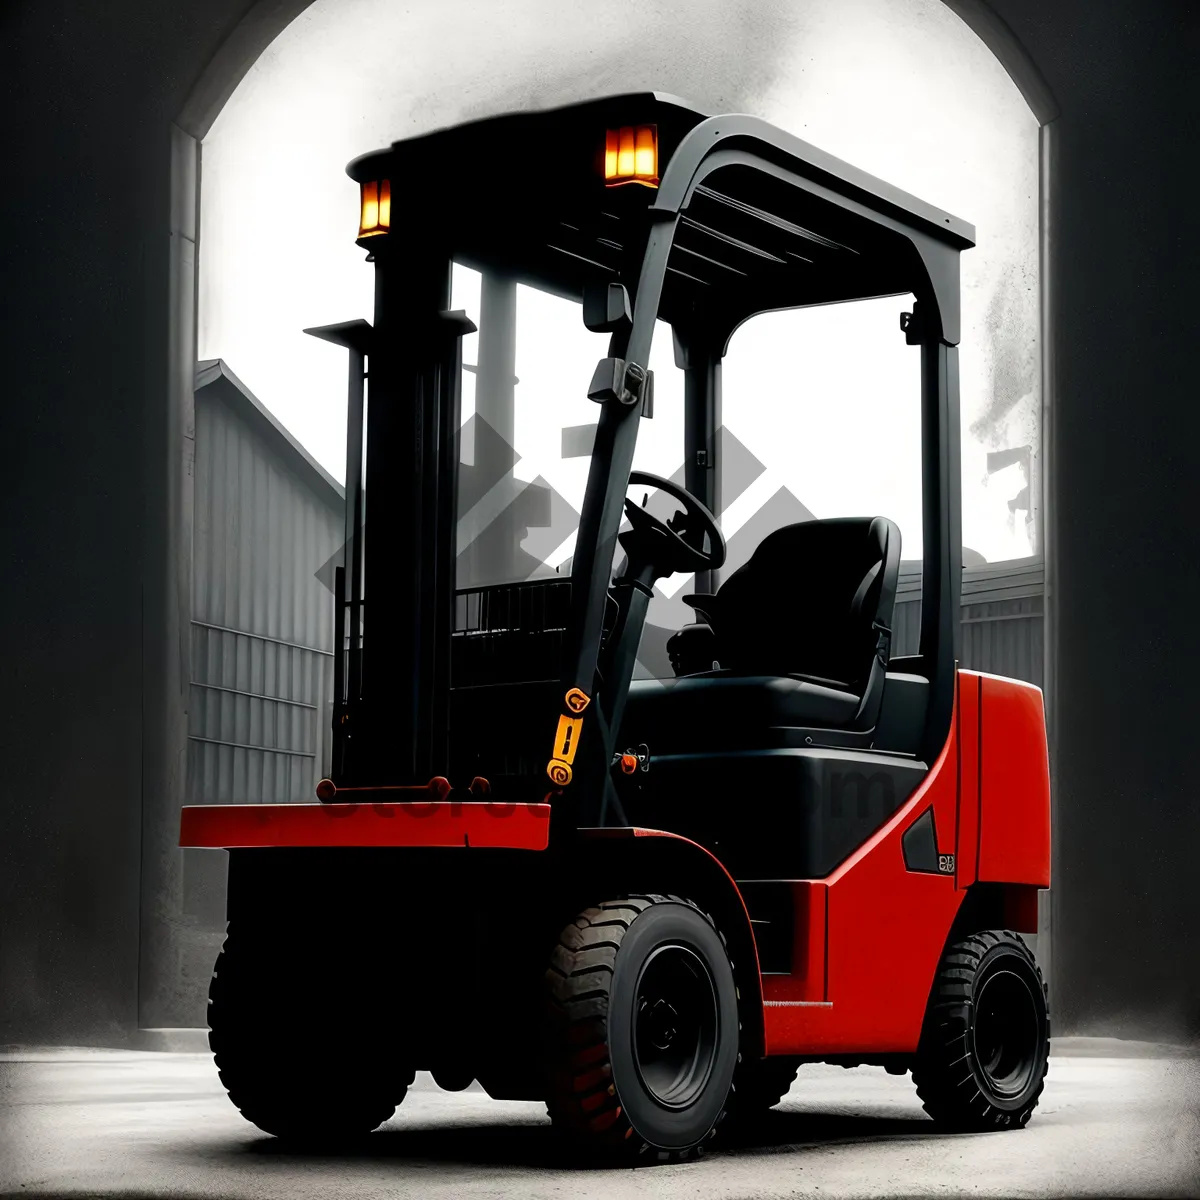 Picture of Industrial Forklift: Heavy Equipment for Transportation and Conveyance